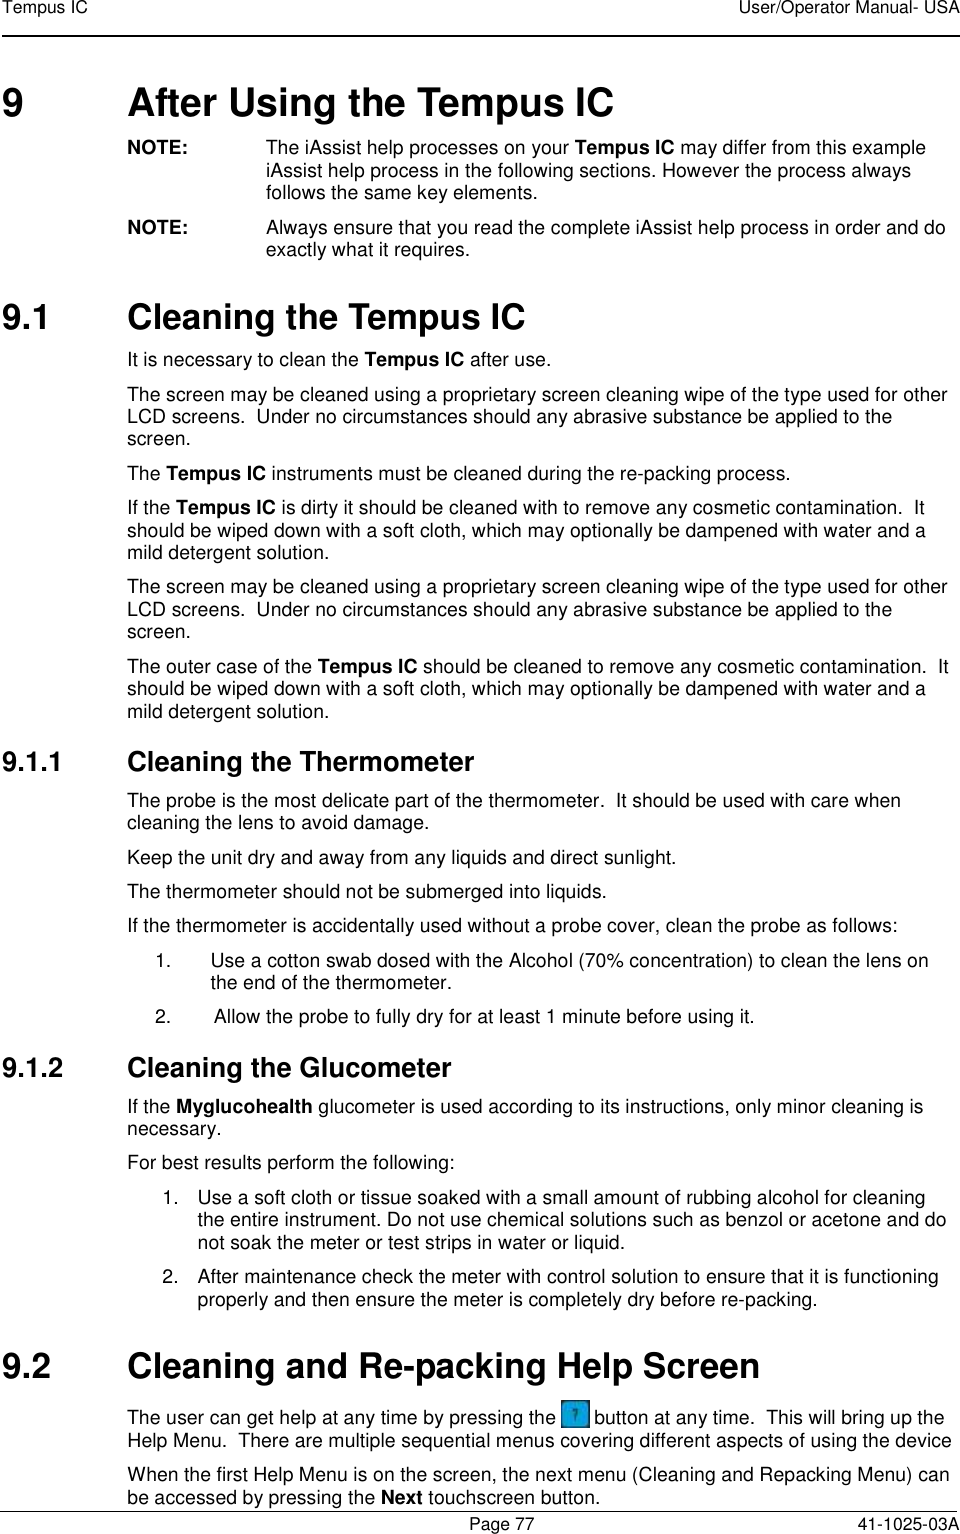 Tempus IC    User/Operator Manual- USA        Page 77   41-1025-03A 9  After Using the Tempus IC NOTE:  The iAssist help processes on your Tempus IC may differ from this example iAssist help process in the following sections. However the process always follows the same key elements.   NOTE:  Always ensure that you read the complete iAssist help process in order and do exactly what it requires.  9.1  Cleaning the Tempus IC It is necessary to clean the Tempus IC after use.   The screen may be cleaned using a proprietary screen cleaning wipe of the type used for other LCD screens.  Under no circumstances should any abrasive substance be applied to the screen. The Tempus IC instruments must be cleaned during the re-packing process. If the Tempus IC is dirty it should be cleaned with to remove any cosmetic contamination.  It should be wiped down with a soft cloth, which may optionally be dampened with water and a mild detergent solution. The screen may be cleaned using a proprietary screen cleaning wipe of the type used for other LCD screens.  Under no circumstances should any abrasive substance be applied to the screen. The outer case of the Tempus IC should be cleaned to remove any cosmetic contamination.  It should be wiped down with a soft cloth, which may optionally be dampened with water and a mild detergent solution. 9.1.1  Cleaning the Thermometer The probe is the most delicate part of the thermometer.  It should be used with care when cleaning the lens to avoid damage. Keep the unit dry and away from any liquids and direct sunlight. The thermometer should not be submerged into liquids. If the thermometer is accidentally used without a probe cover, clean the probe as follows: 1.  Use a cotton swab dosed with the Alcohol (70% concentration) to clean the lens on the end of the thermometer. 2.  Allow the probe to fully dry for at least 1 minute before using it. 9.1.2  Cleaning the Glucometer  If the Myglucohealth glucometer is used according to its instructions, only minor cleaning is necessary. For best results perform the following: 1.  Use a soft cloth or tissue soaked with a small amount of rubbing alcohol for cleaning the entire instrument. Do not use chemical solutions such as benzol or acetone and do not soak the meter or test strips in water or liquid. 2.  After maintenance check the meter with control solution to ensure that it is functioning properly and then ensure the meter is completely dry before re-packing. 9.2  Cleaning and Re-packing Help Screen The user can get help at any time by pressing the   button at any time.  This will bring up the Help Menu.  There are multiple sequential menus covering different aspects of using the device When the first Help Menu is on the screen, the next menu (Cleaning and Repacking Menu) can be accessed by pressing the Next touchscreen button. 